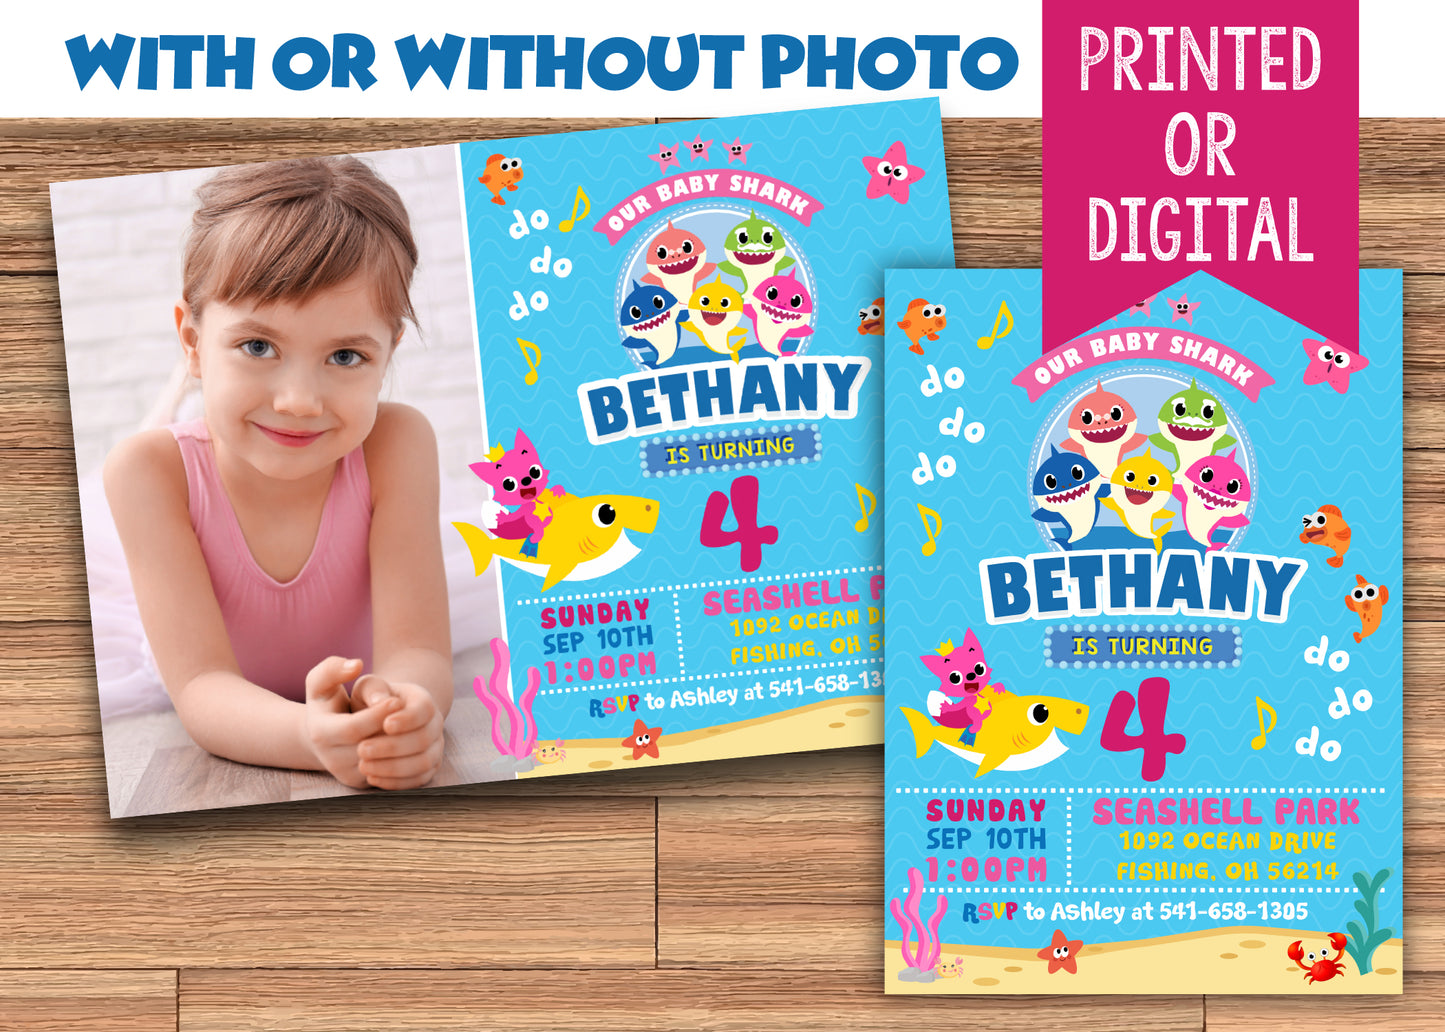 BABY SHARK Digital or Printed Birthday Party Invitation with or without Photo!